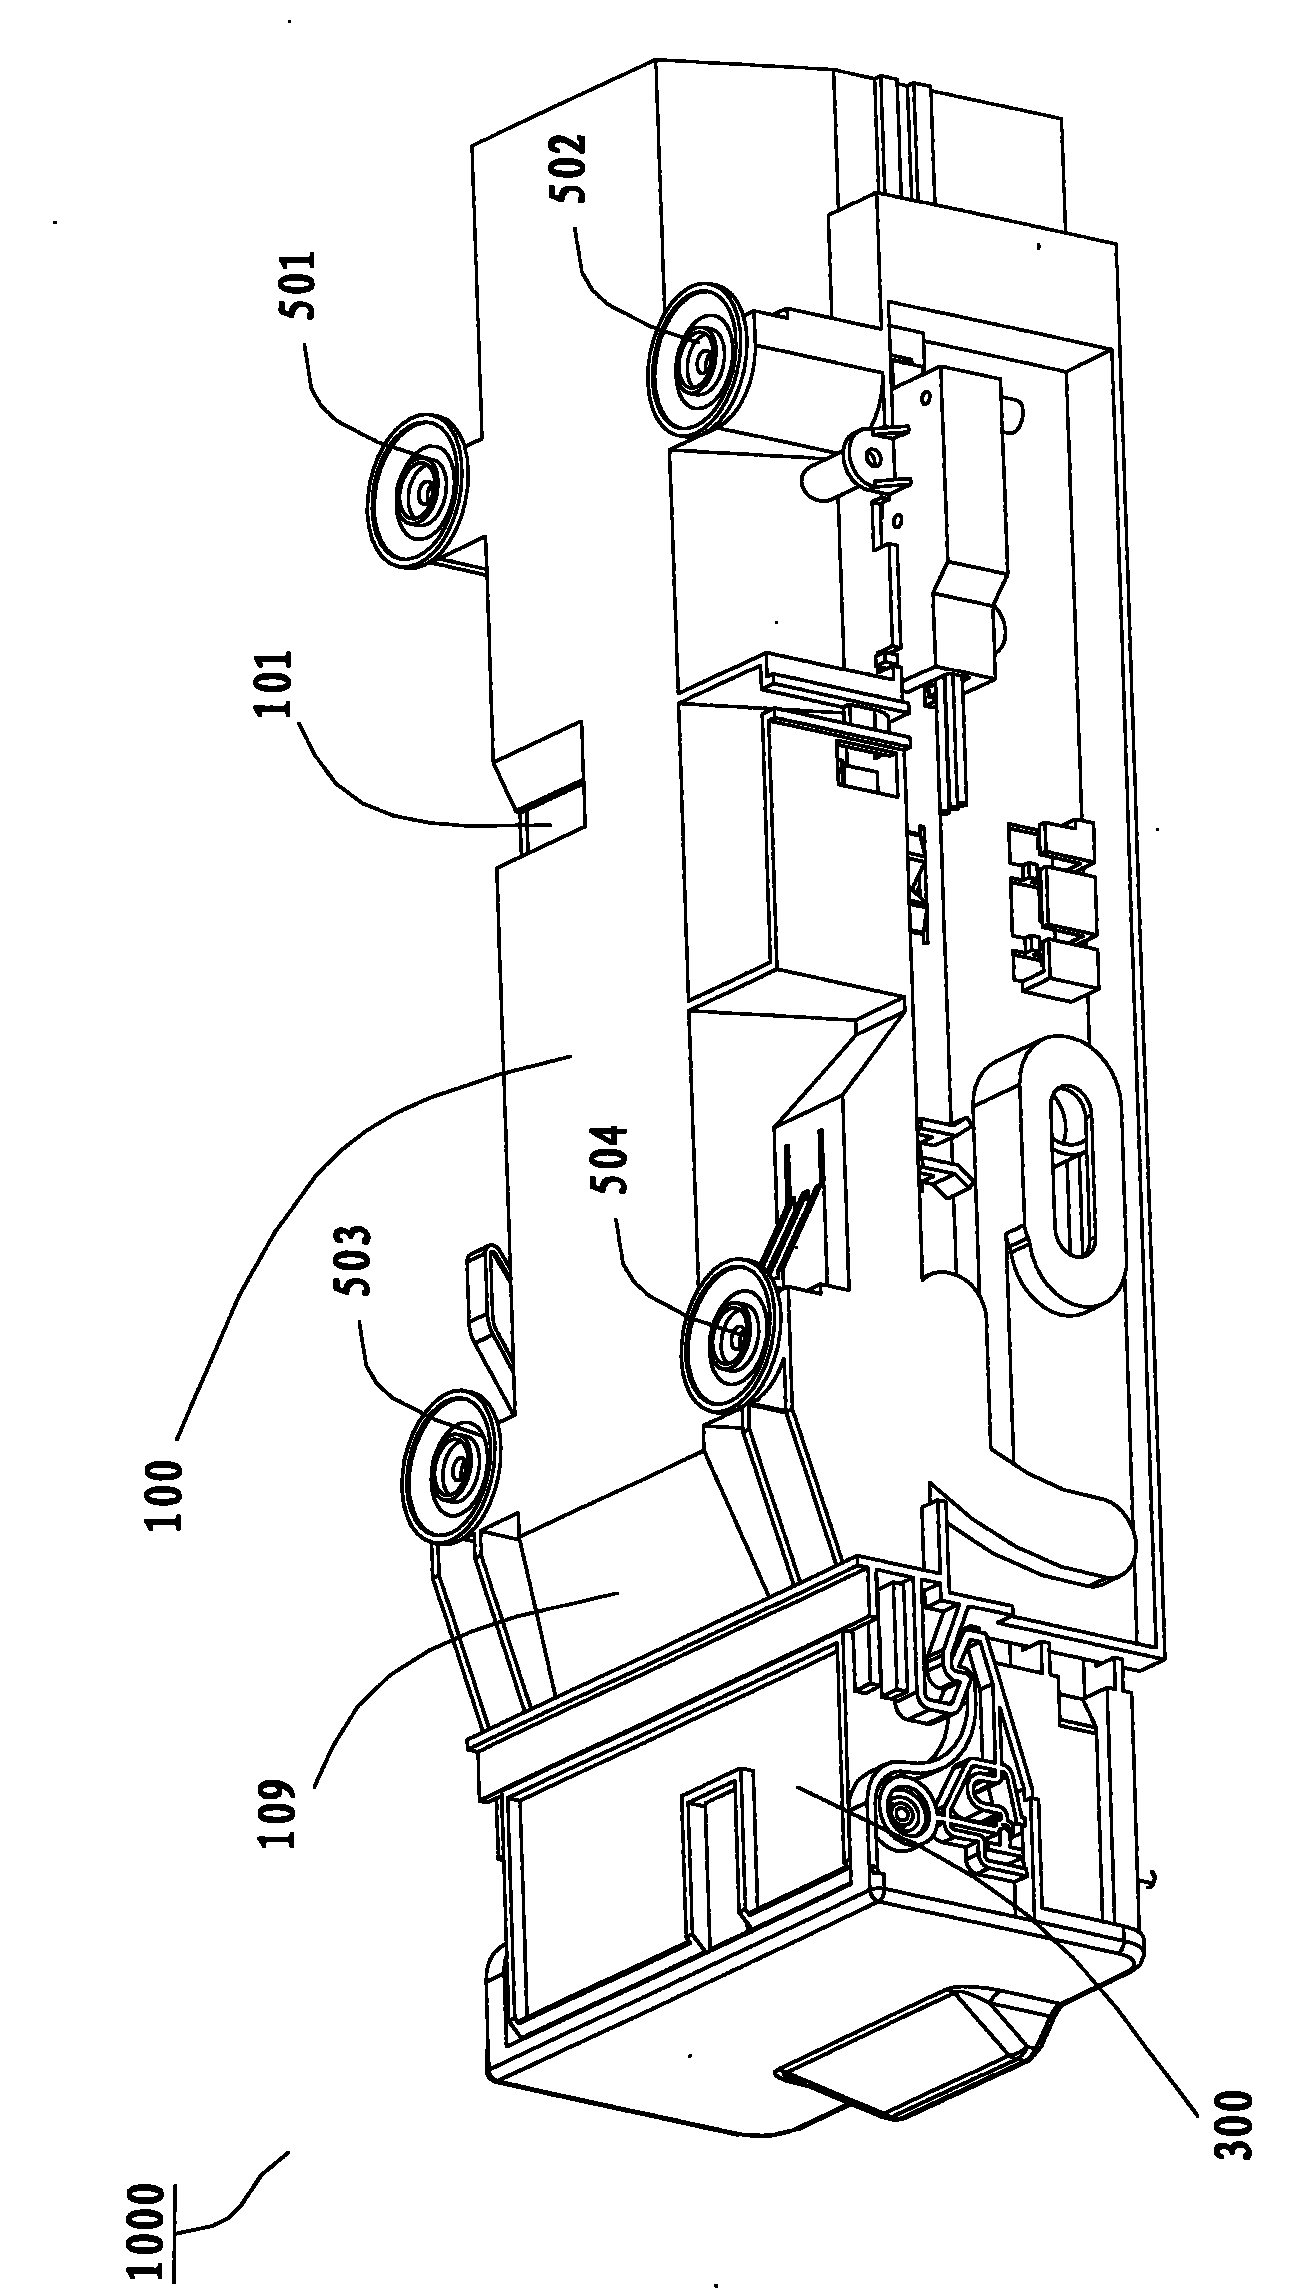 Automatic ice machine and refrigerator provided with same